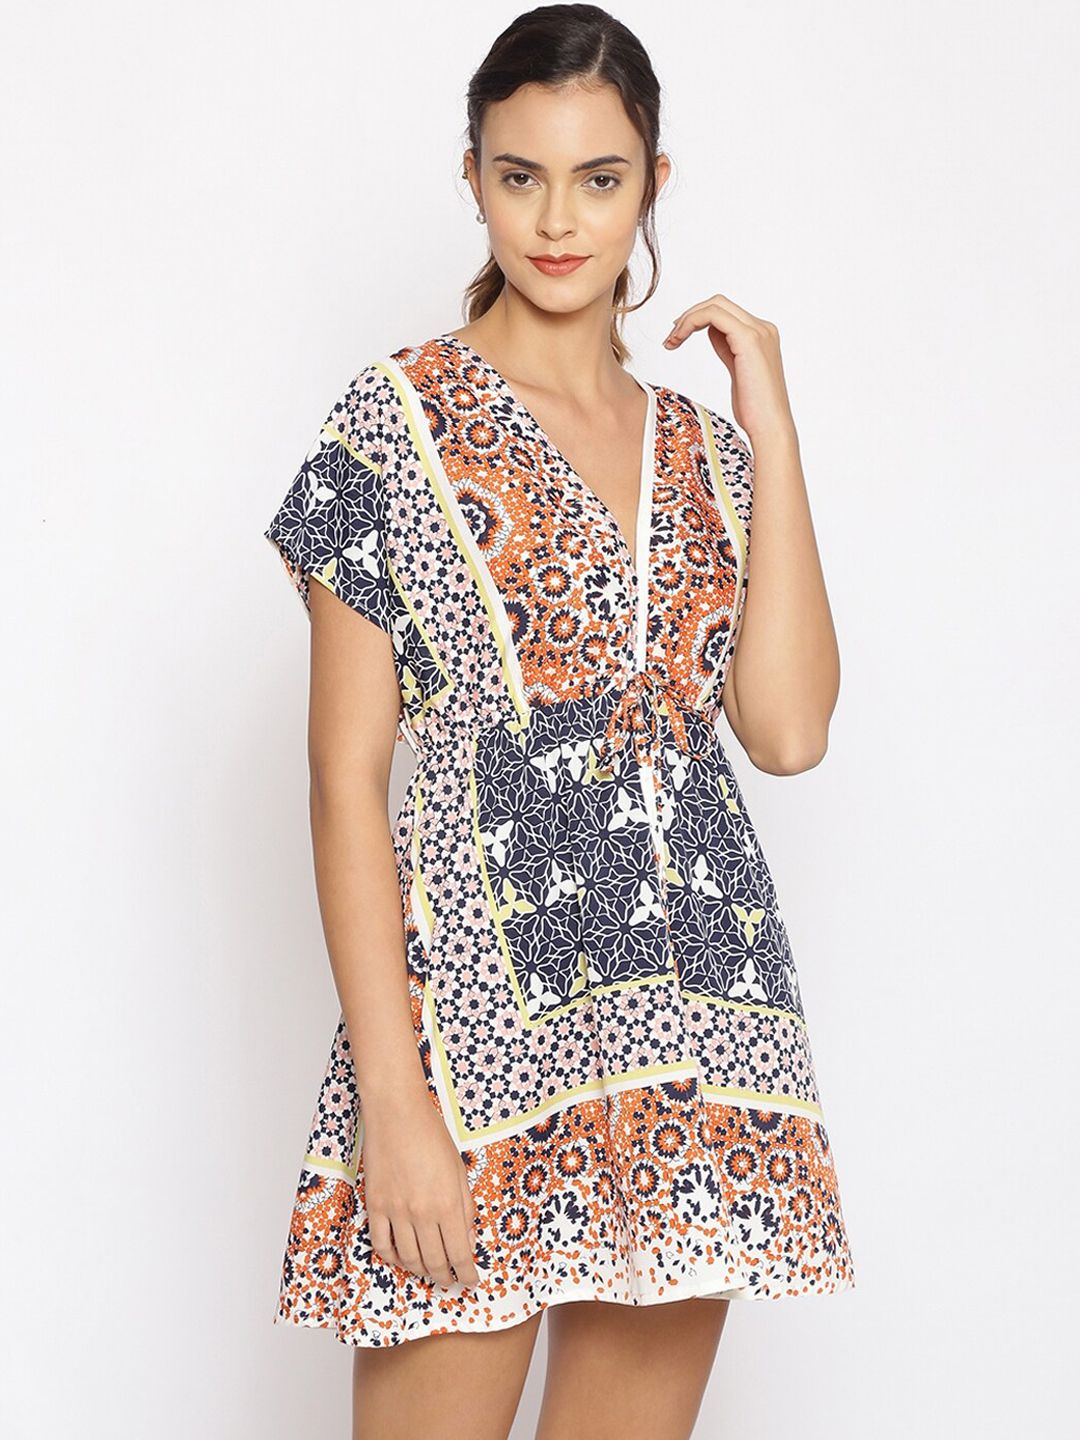 Oxolloxo Women Blue & Pink Geometric Scarf Printed Beachwear Cover-up Dress Price in India